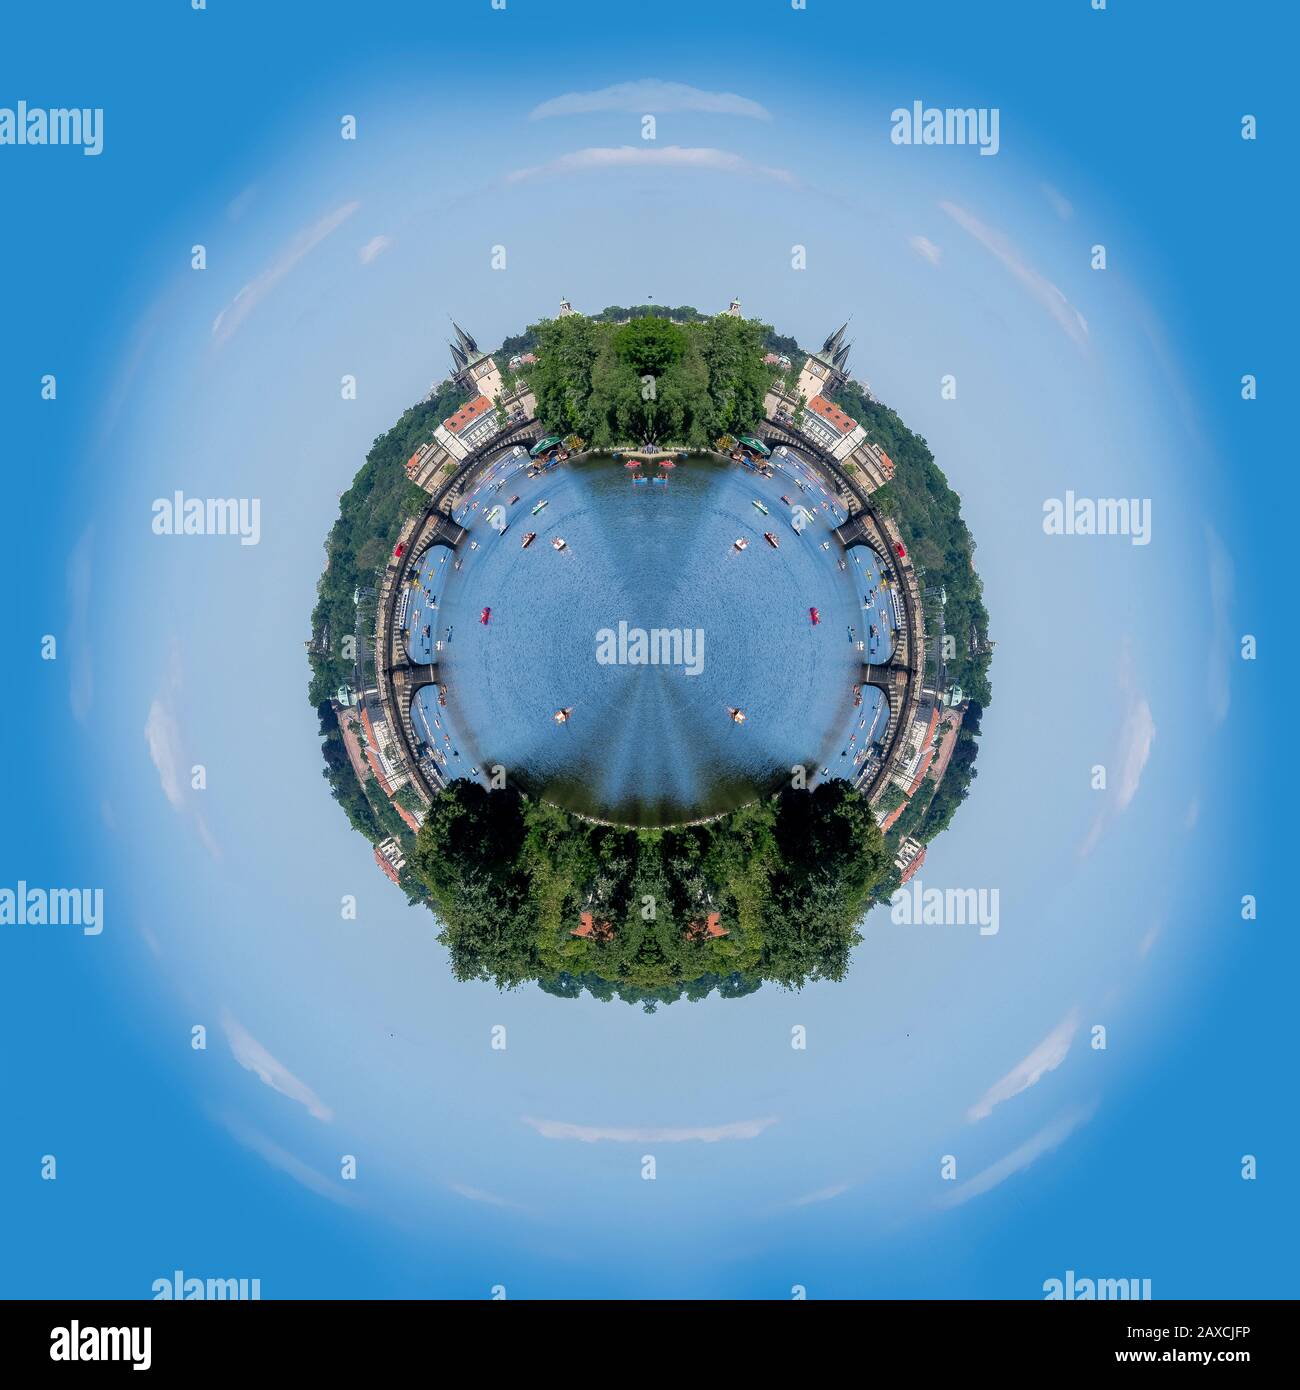 Tiny planet with water, boats, trees and a bridge Stock Photo